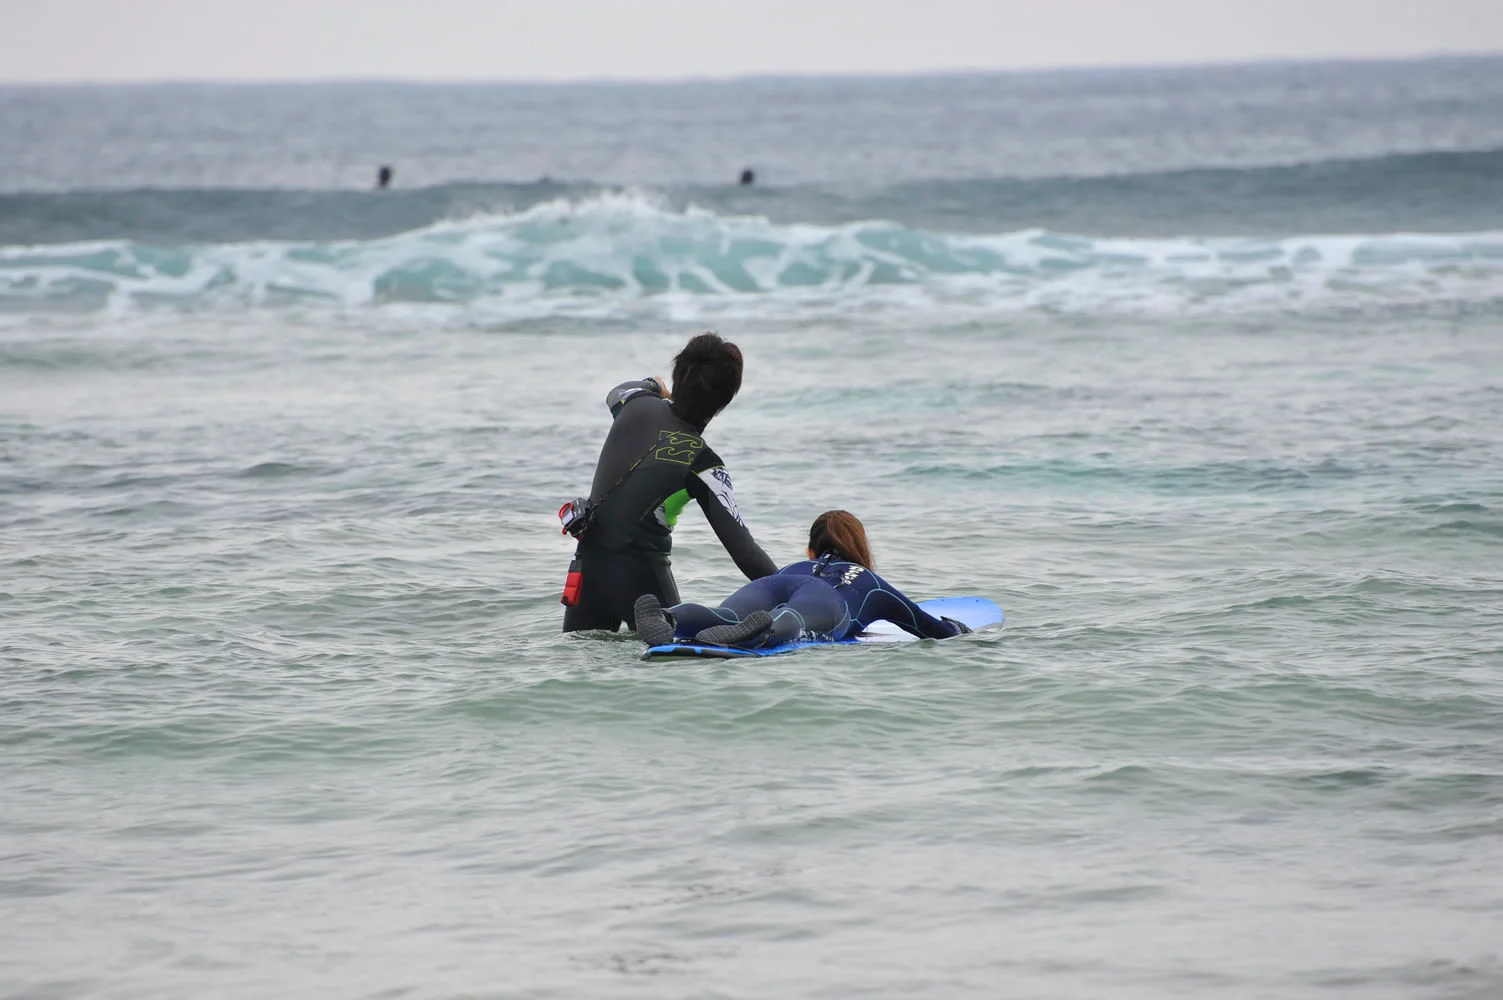 Learn to Surf in Chatan, Okinawa